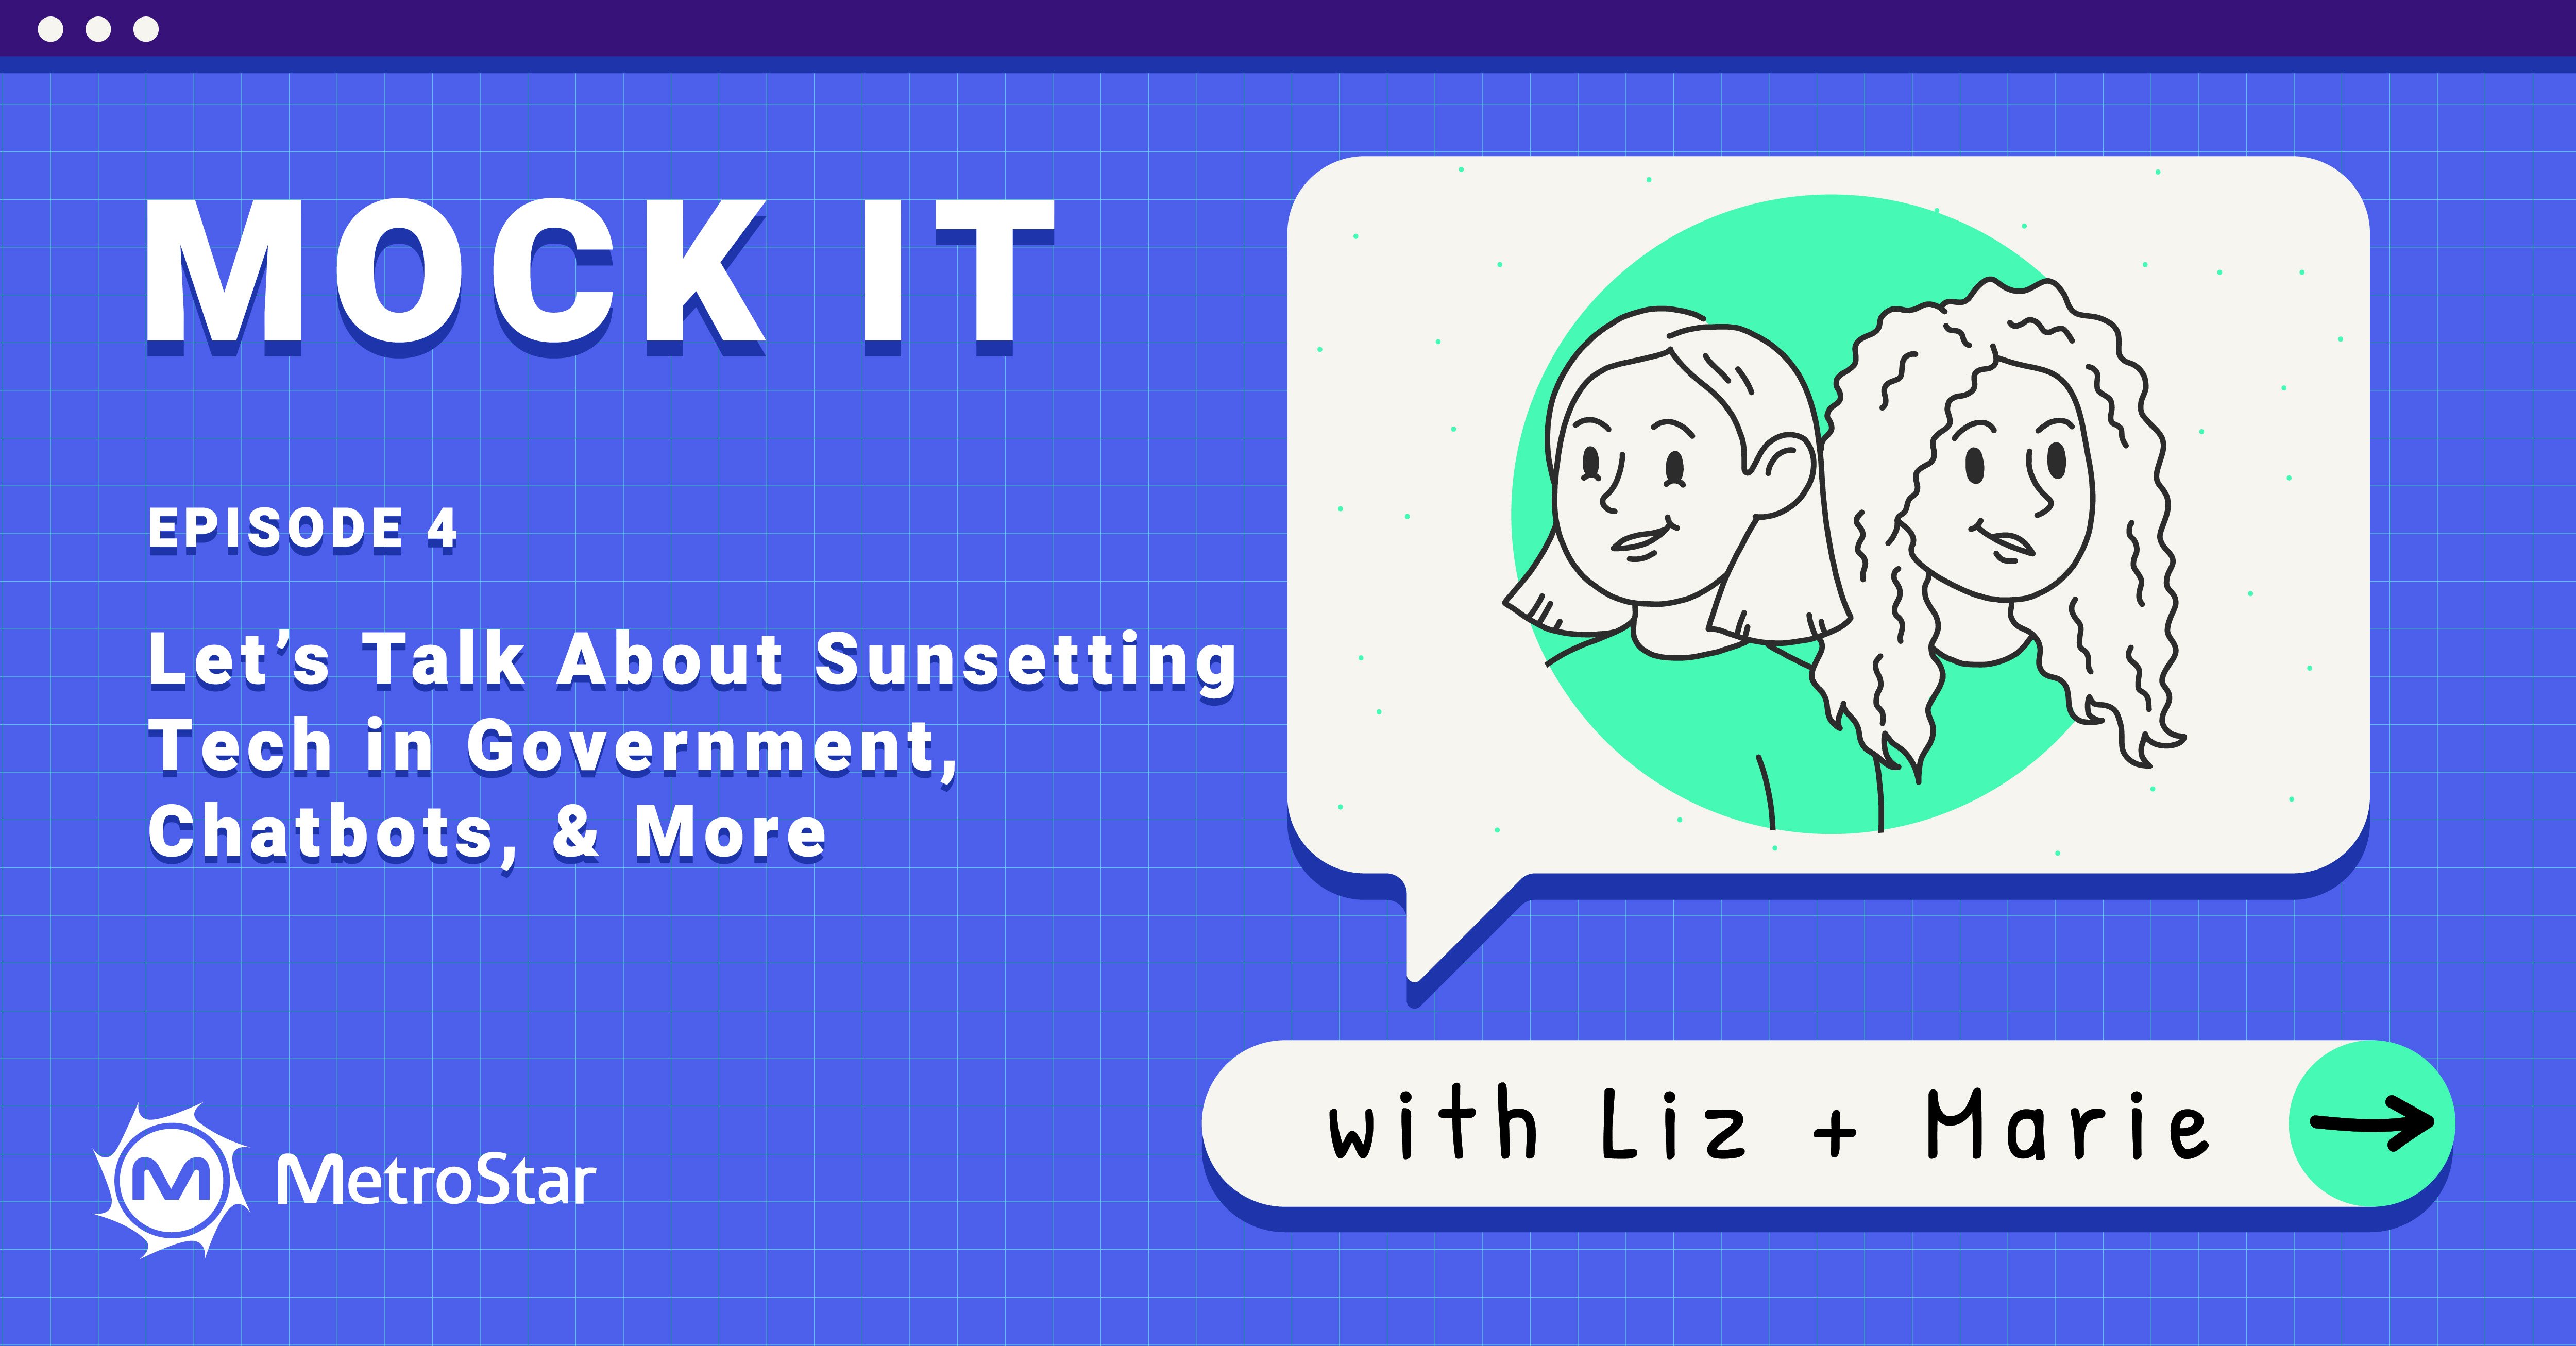 Mock IT: Sunsetting Tech in Government, Chatbots, & More